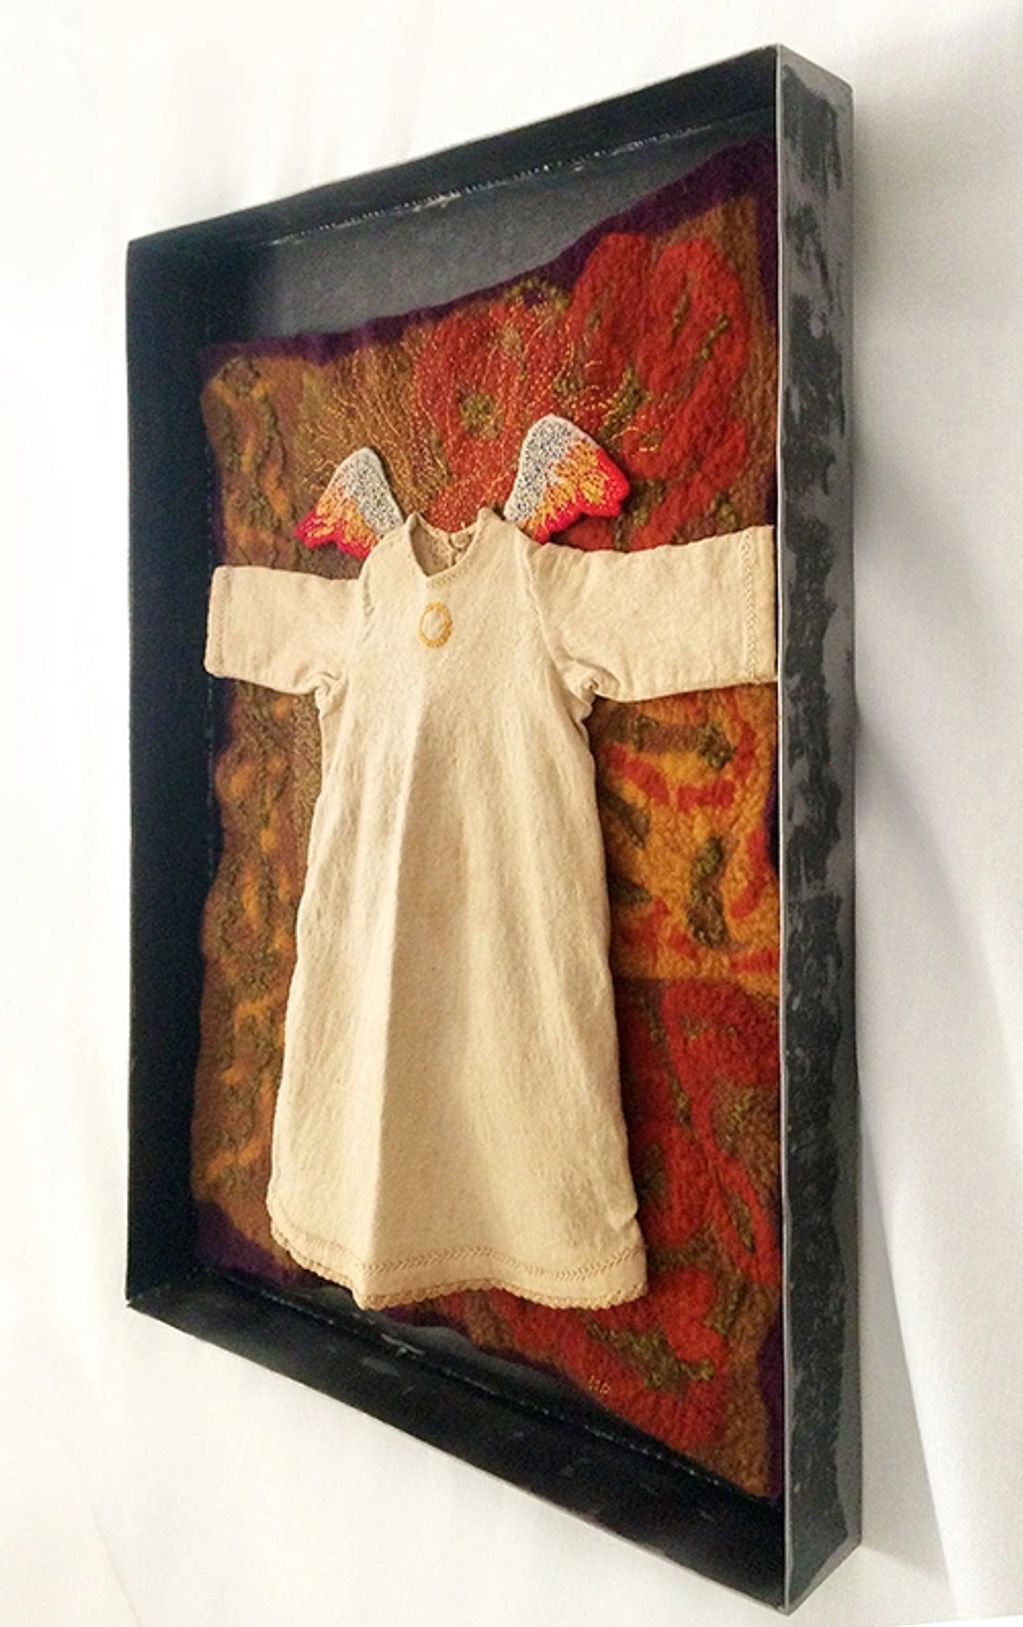 Secret Life of Things, 23.5" x 17.5" x 2"
Artist-made wool and silk felt, hand embroidery, doll dres